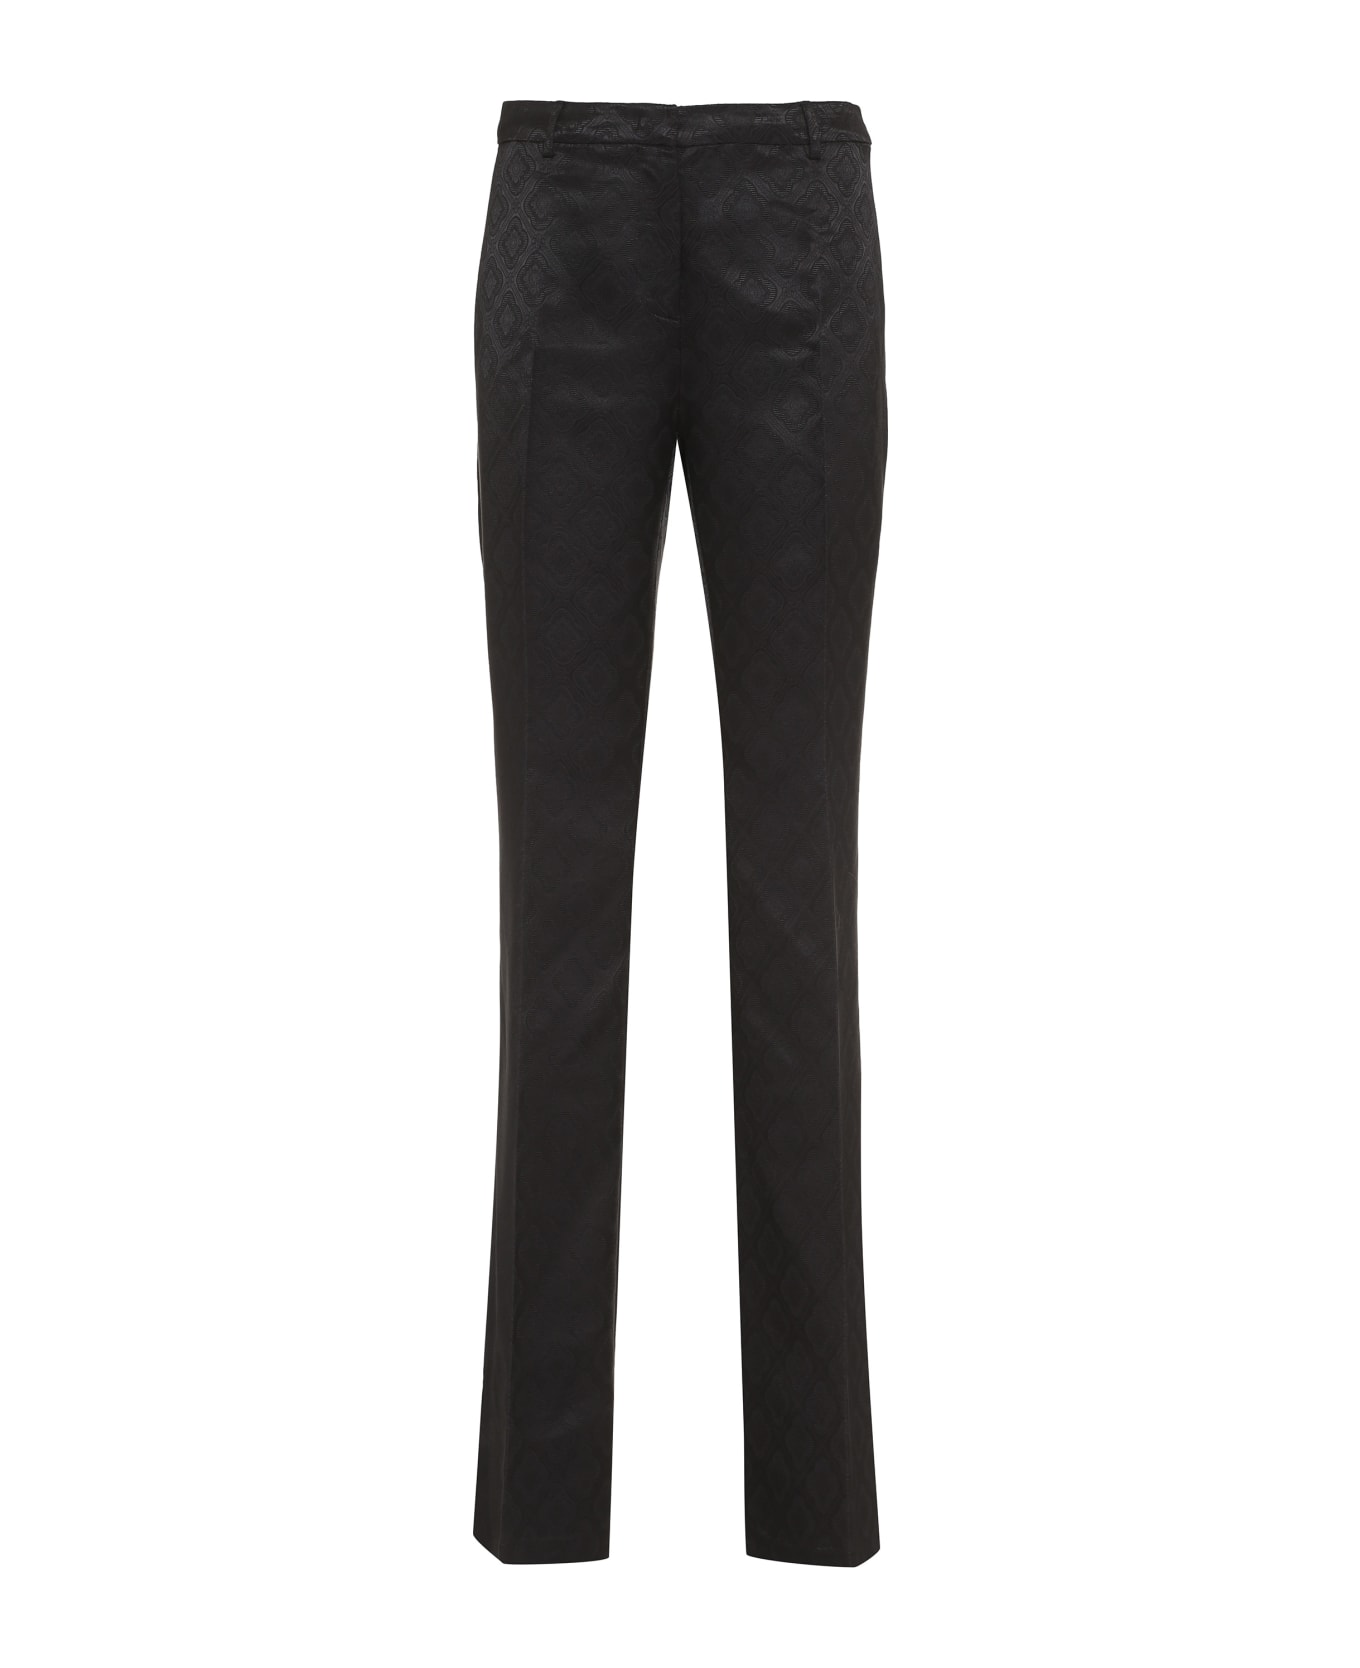 Etro Flared Trousers - black ボトムス